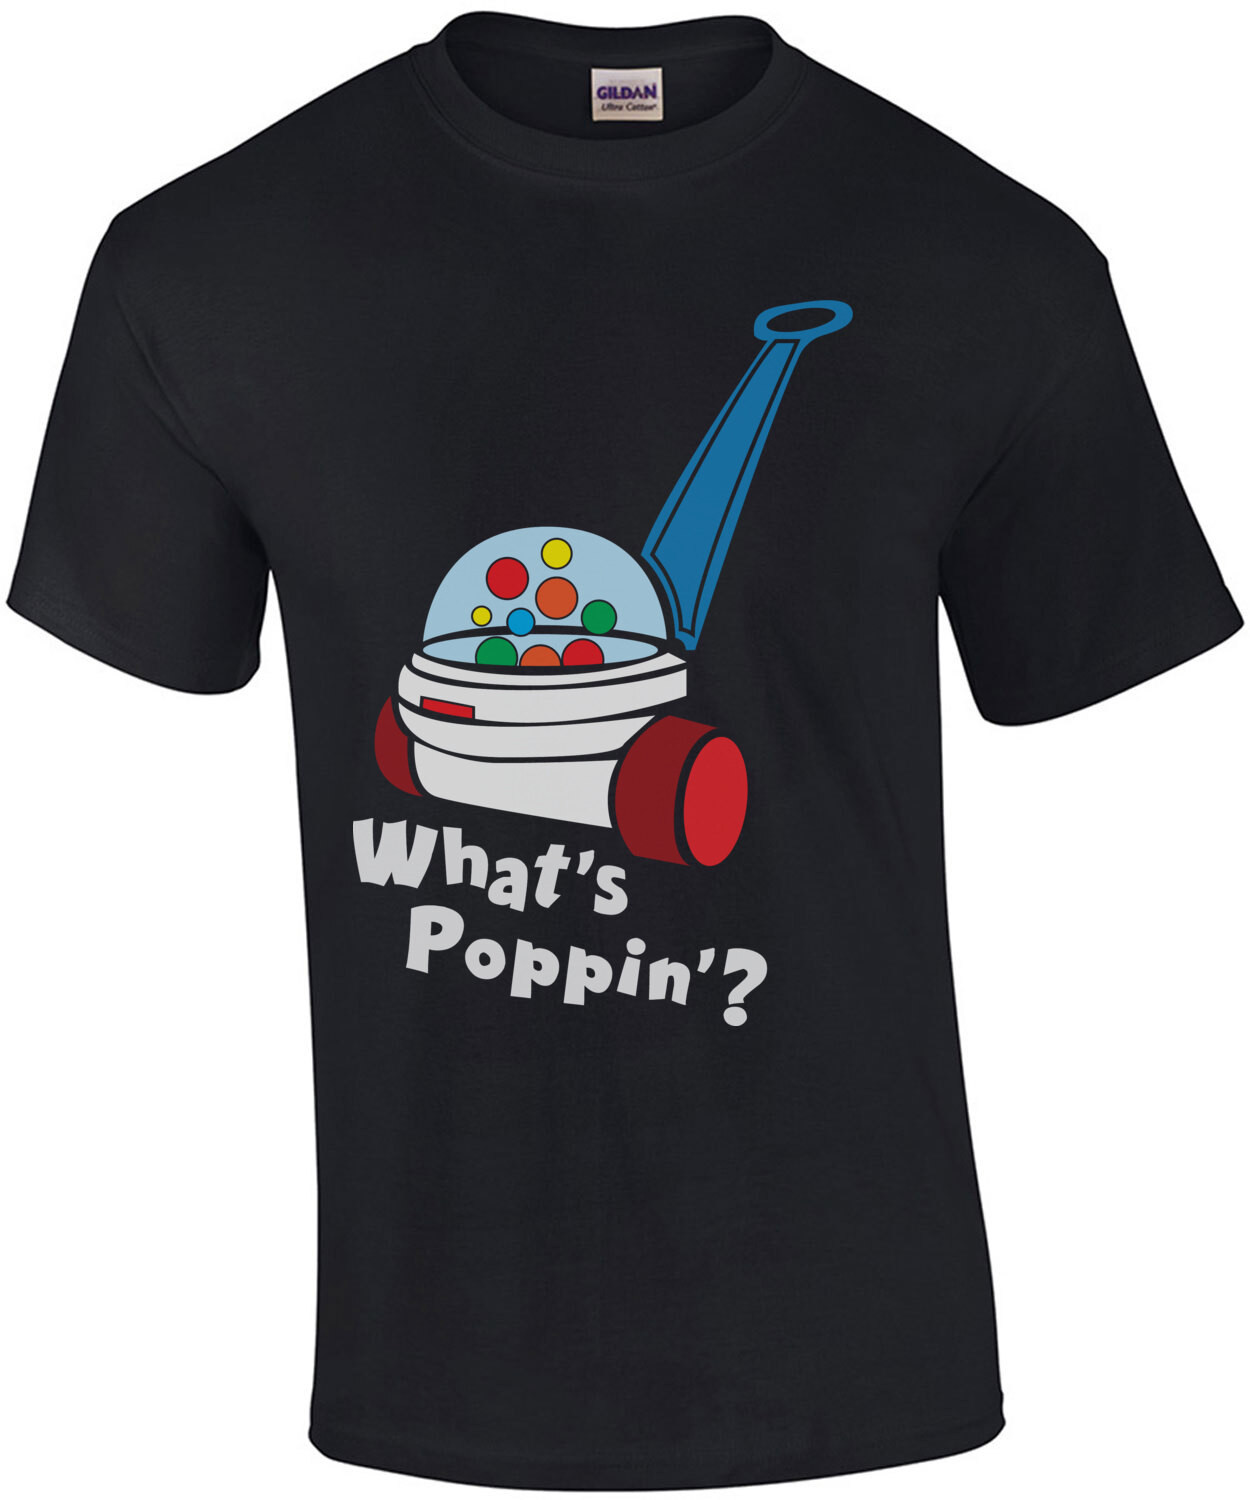 What's Poppin'? Funny Retro Fisher Price Corn Popper Toy 80's T-Shirt